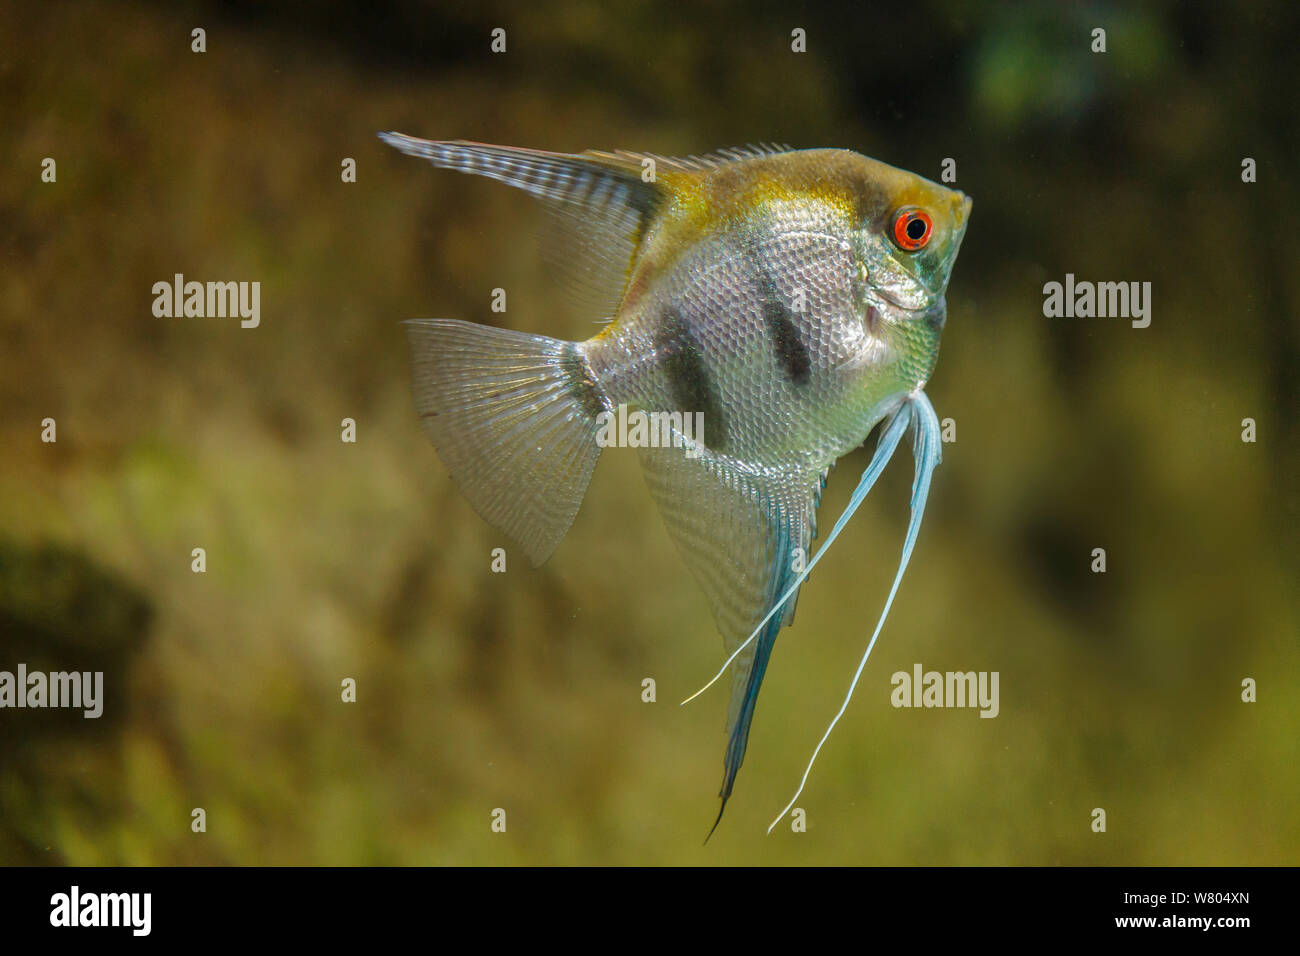 Freshwater angelfish (Pterophyllum scalare) captive, occurs in South America. Stock Photo